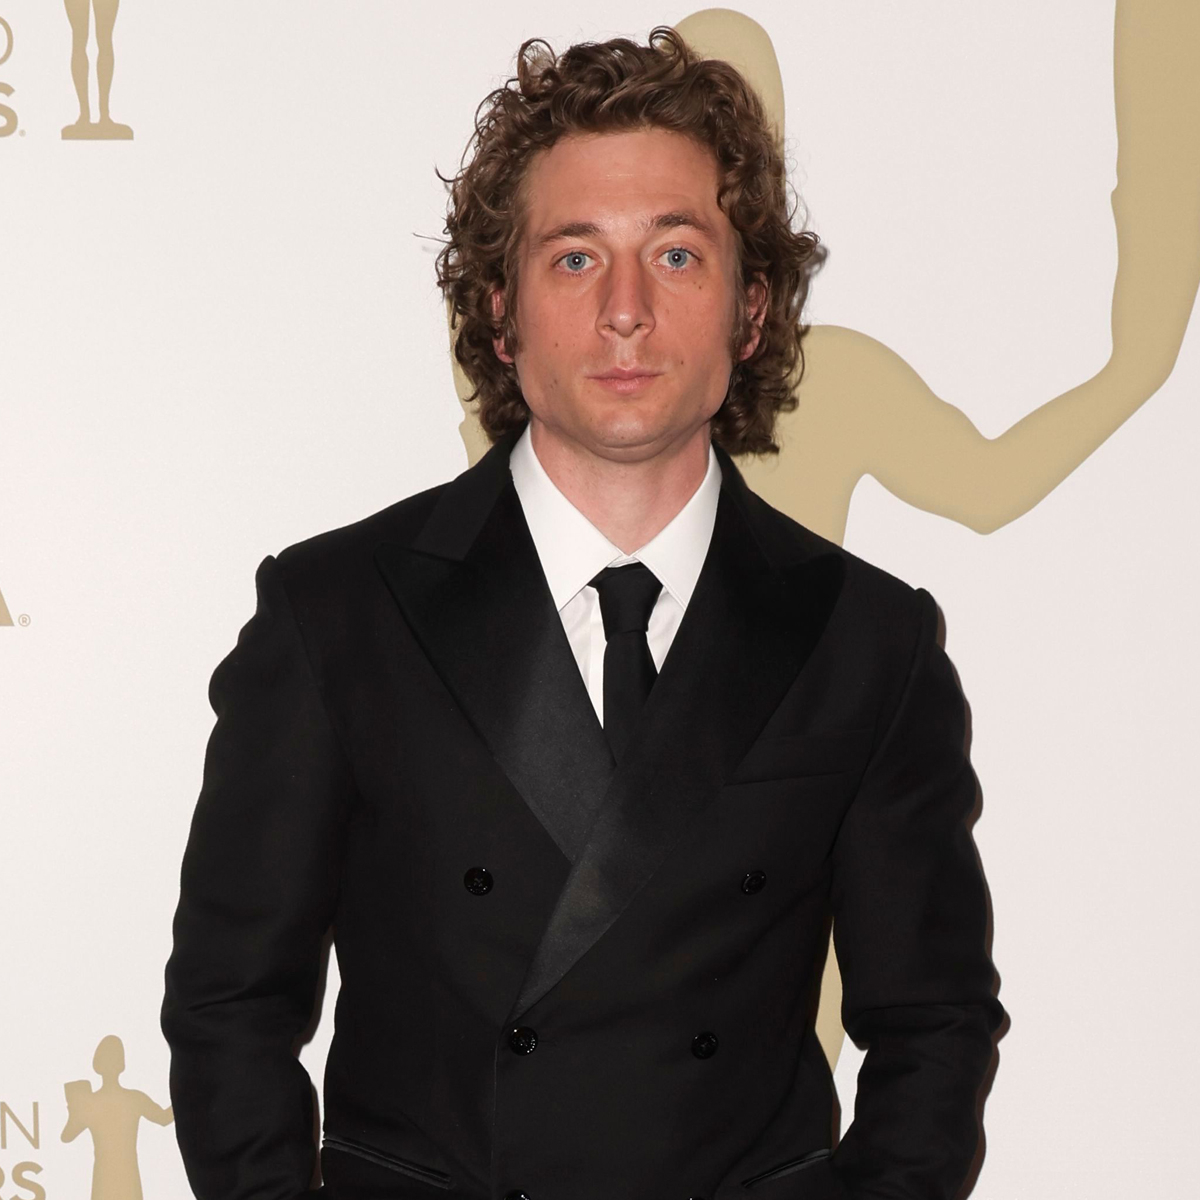 You’ll Say “Yes Chef” to These Shirtless Pics of Jeremy Allen White